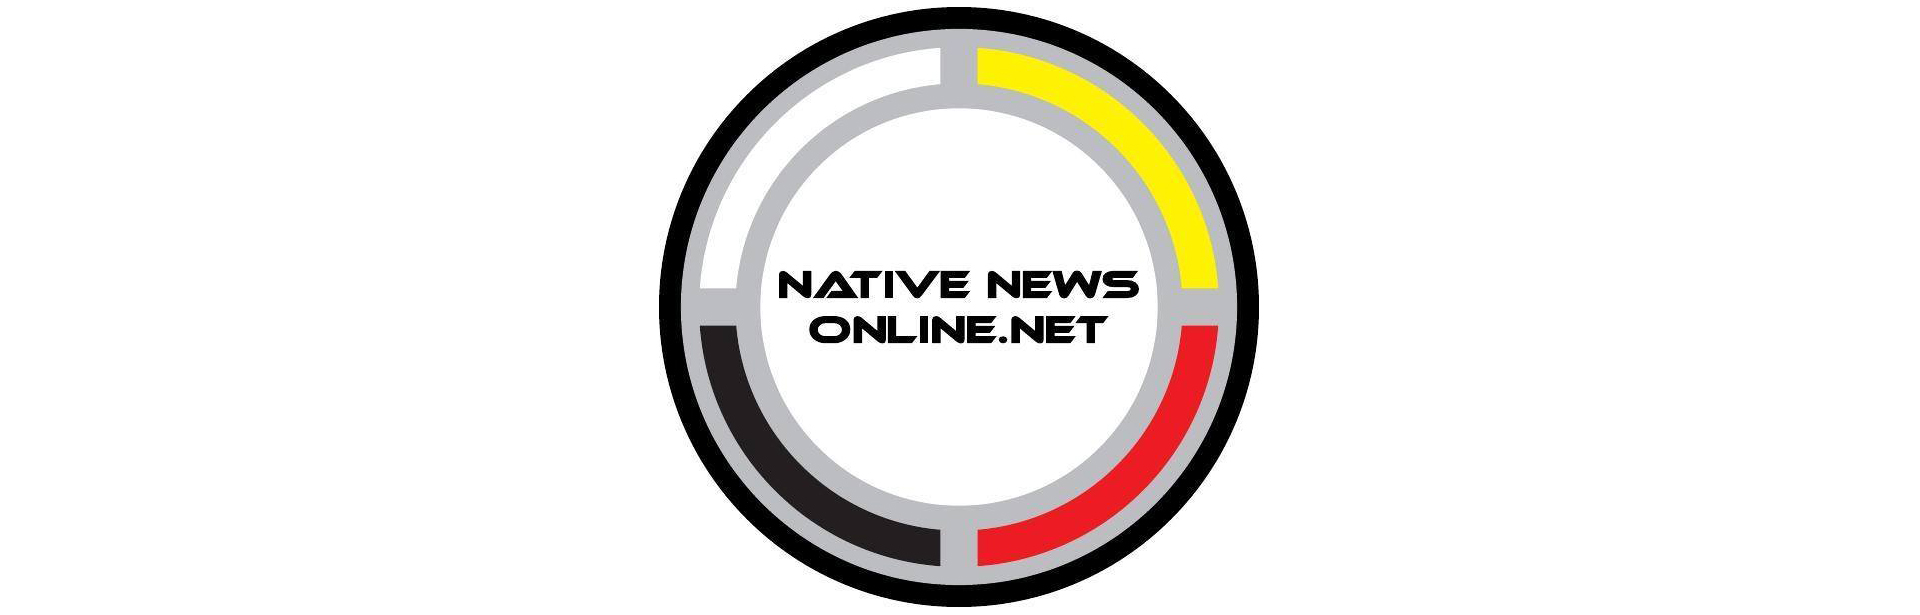 The wordmark logo of nativenewsonline.net is a circle with yellow, red, black and white elements.